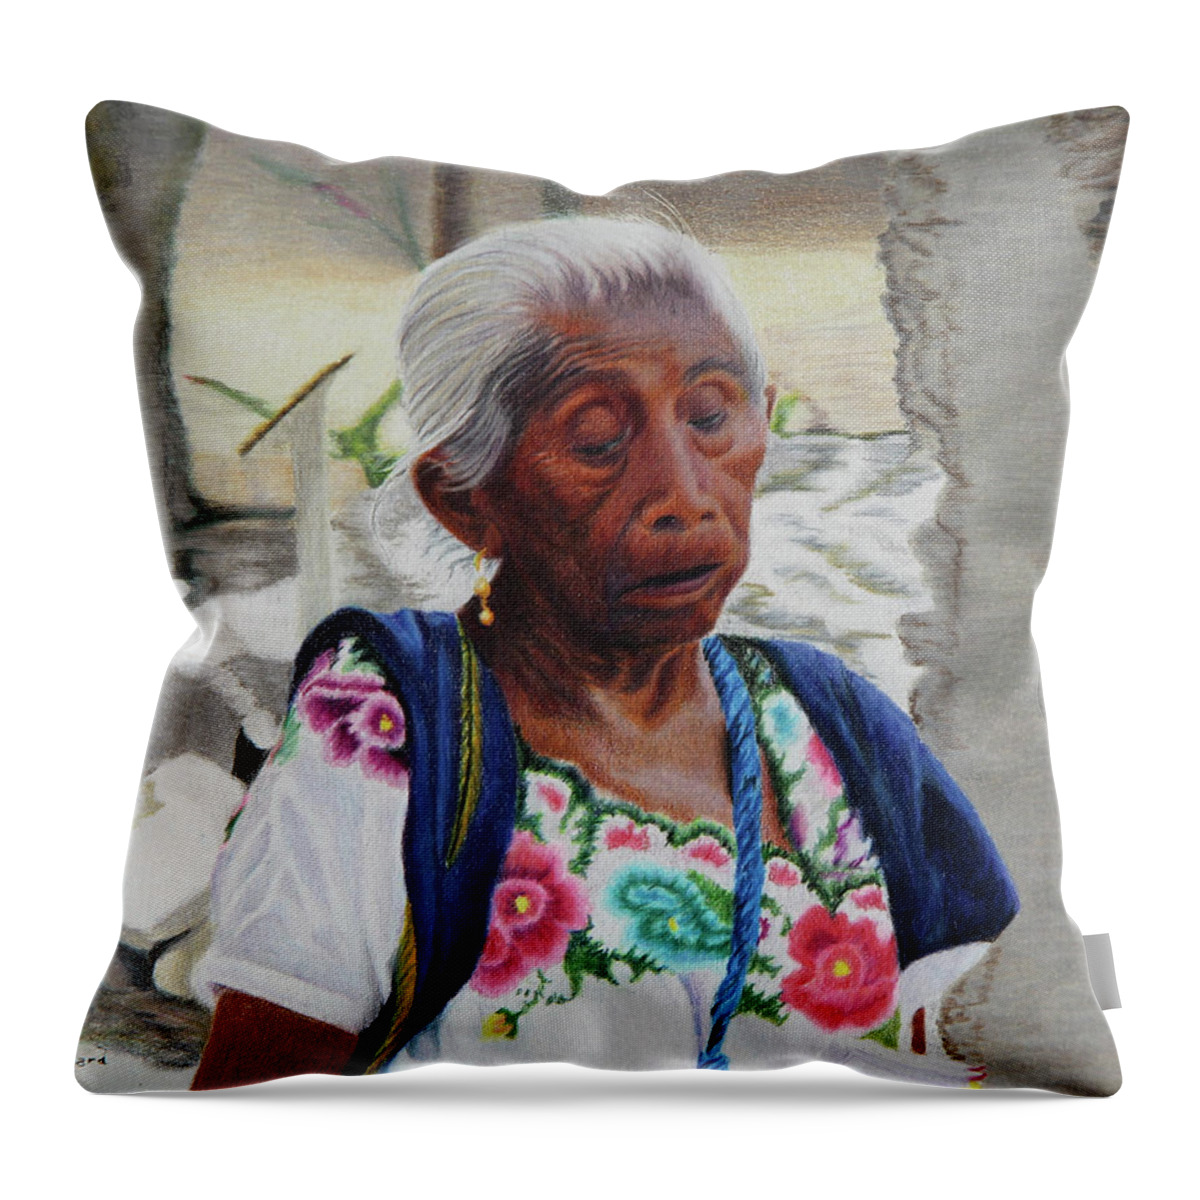 Mexico Throw Pillow featuring the drawing Seasoned by Pamella Bernard